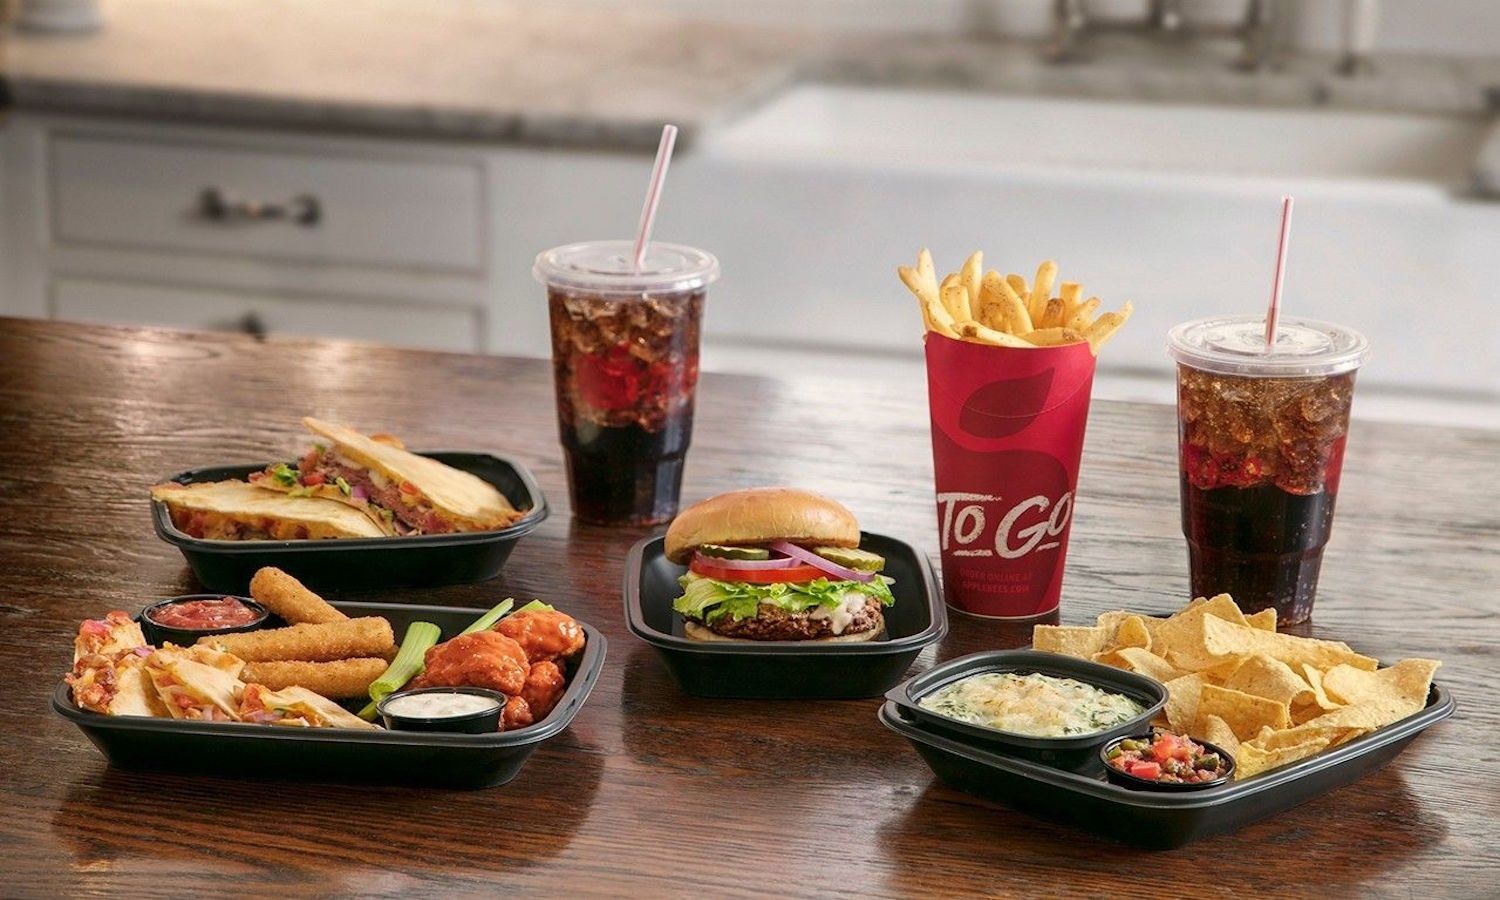 Applebee’s Takeout Near You in Terrell